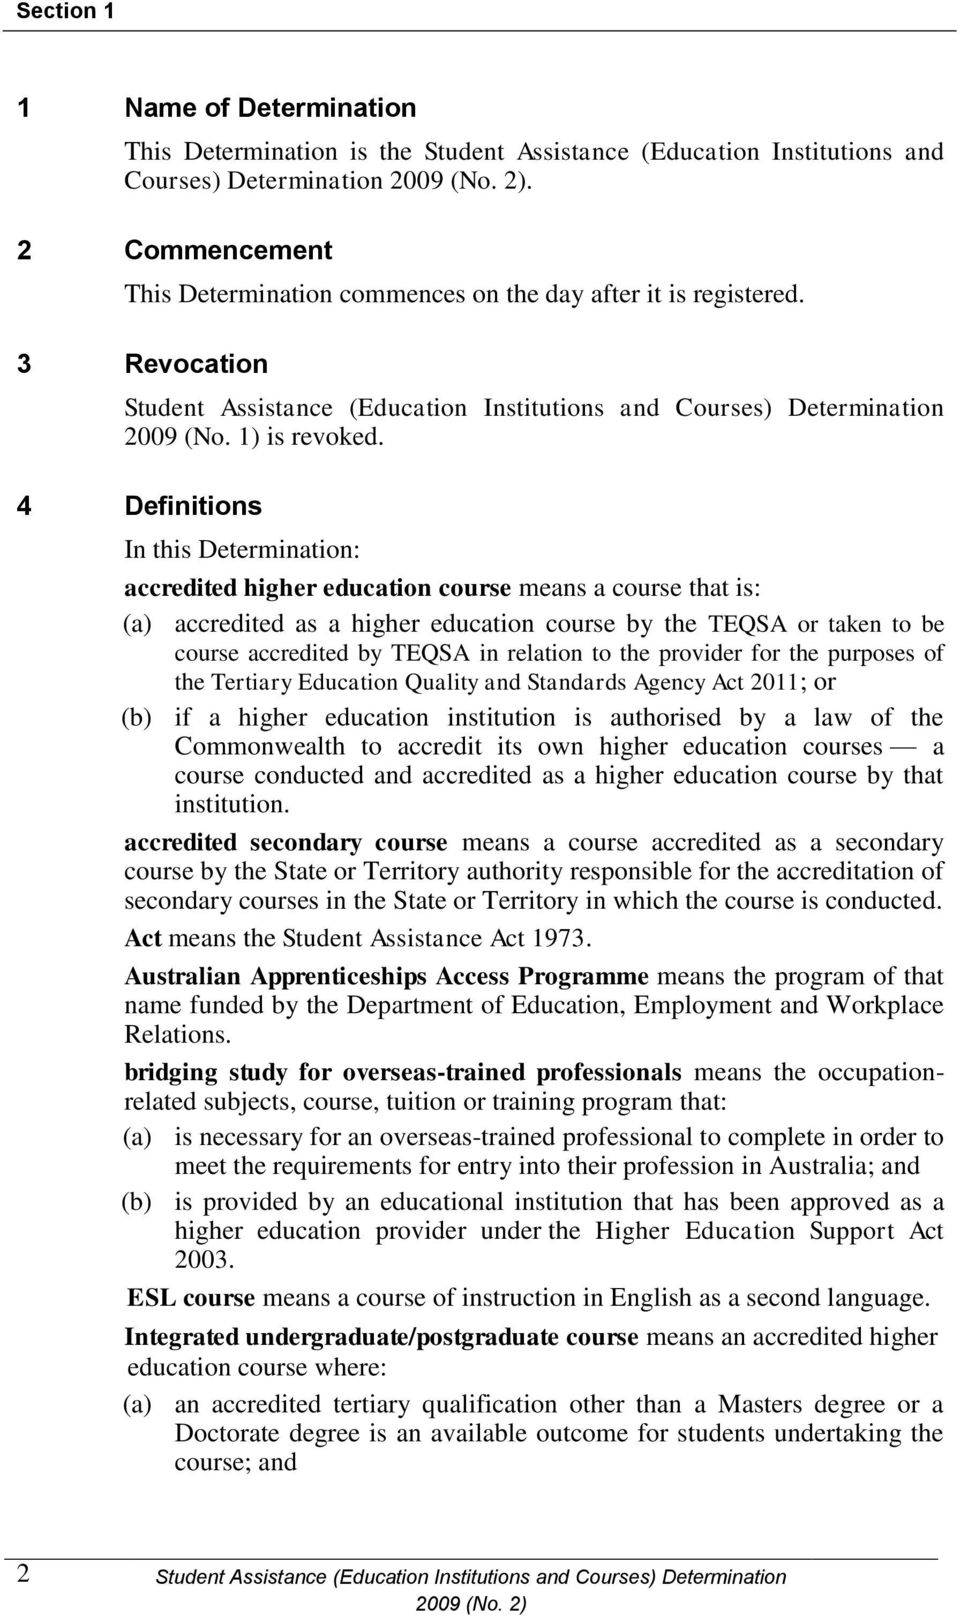 4 Definitions In this Determination: accredited higher education course means a course that is: (a) accredited as a higher education course by the TEQSA or taken to be course accredited by TEQSA in